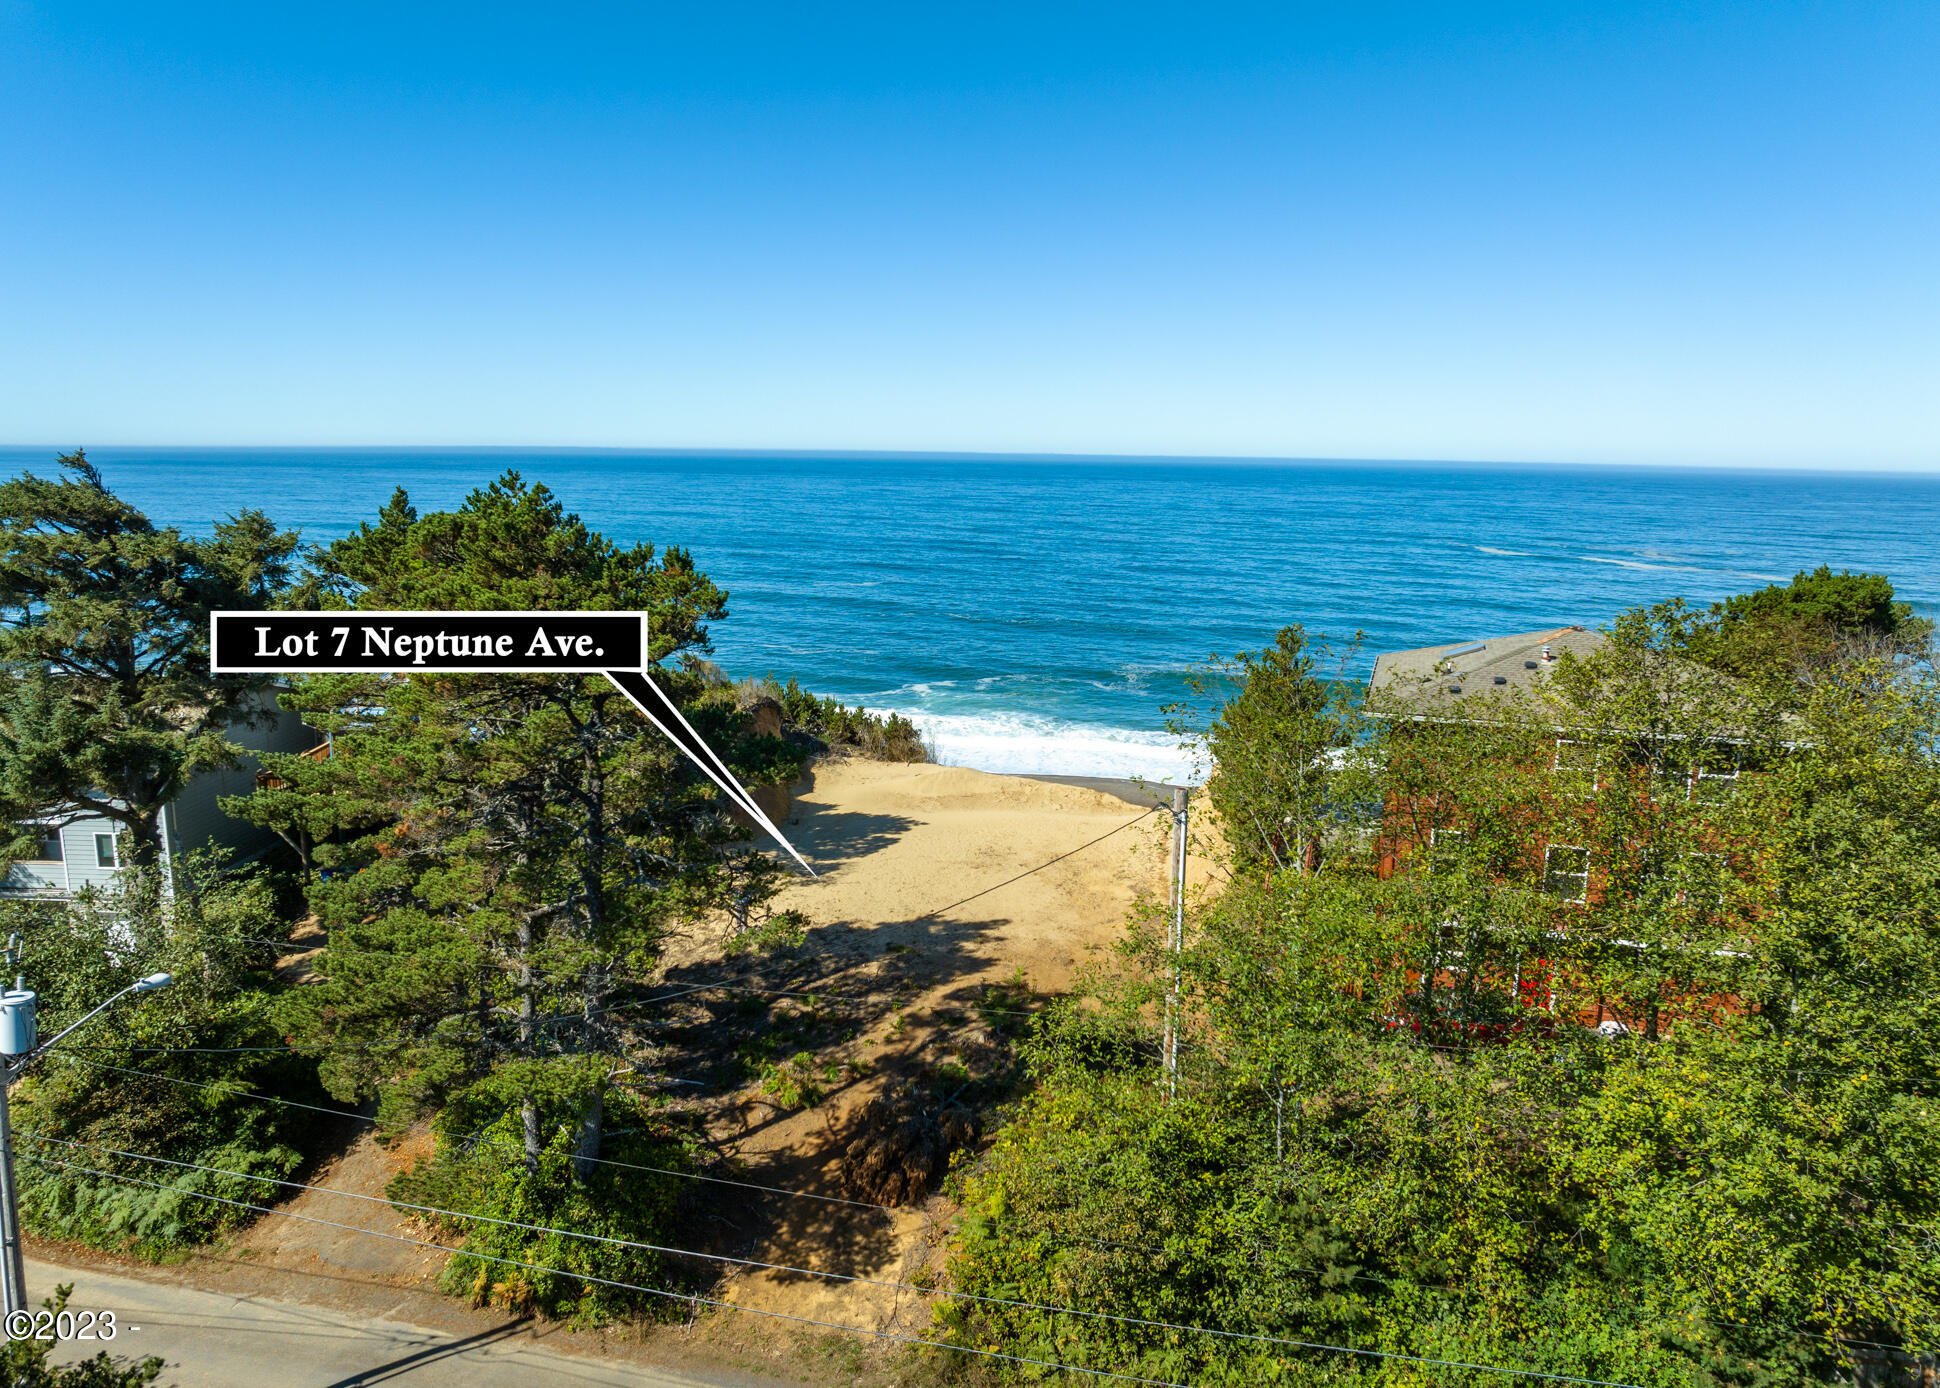 Lot 7 Neptune Depoe Bay, Gleneden Beach, Lincoln City, Newport, Otis, Rose Lodge, Seal Rock, Waldport, Yachats, To Home Listings - Amy Plechaty, Emerald Coast Realty Real Estate, homes for sale, property for sale